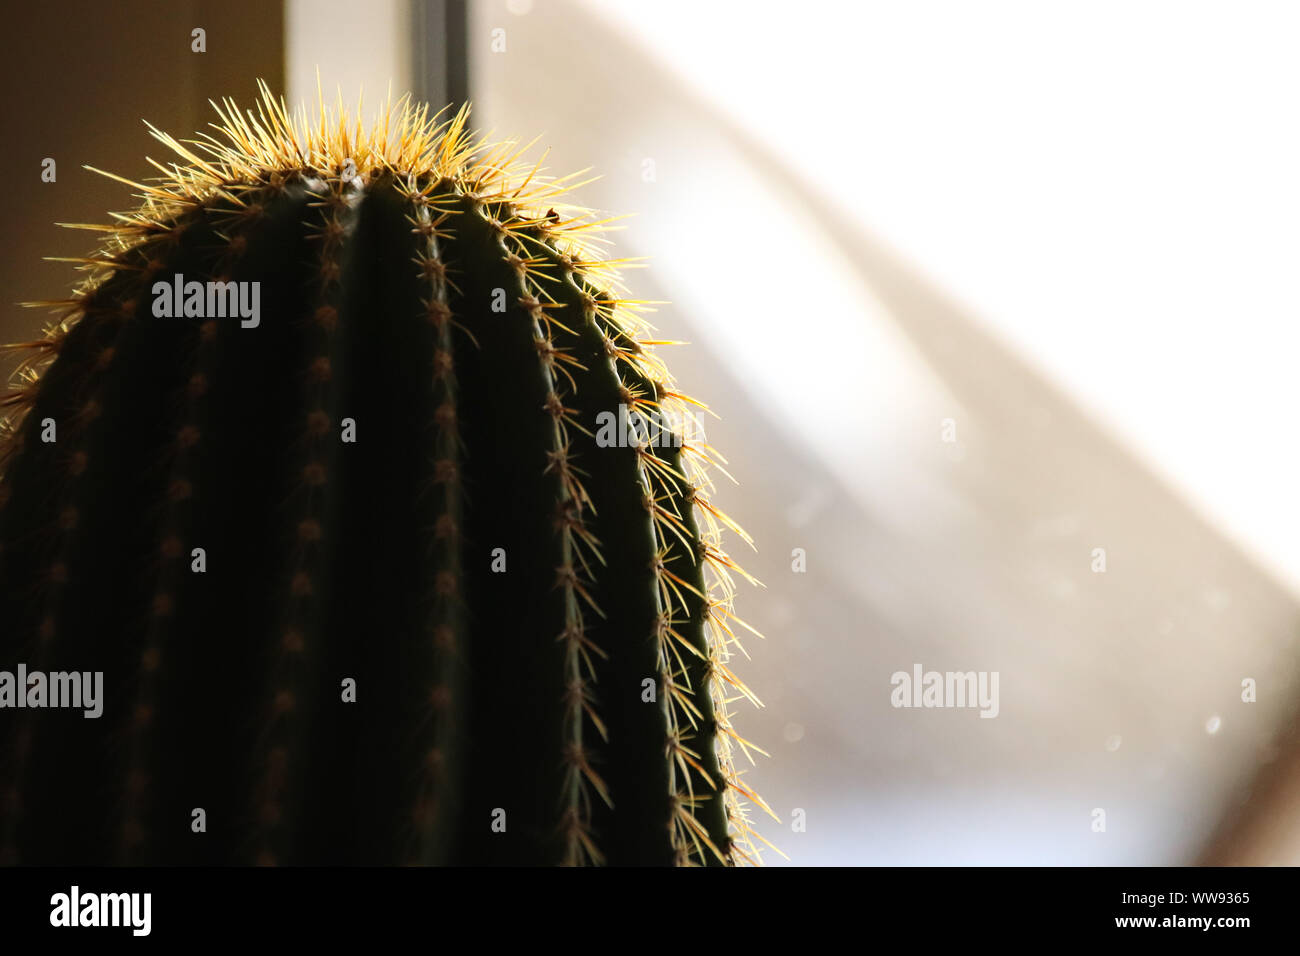 sunlight from window shining on a cactus Stock Photo